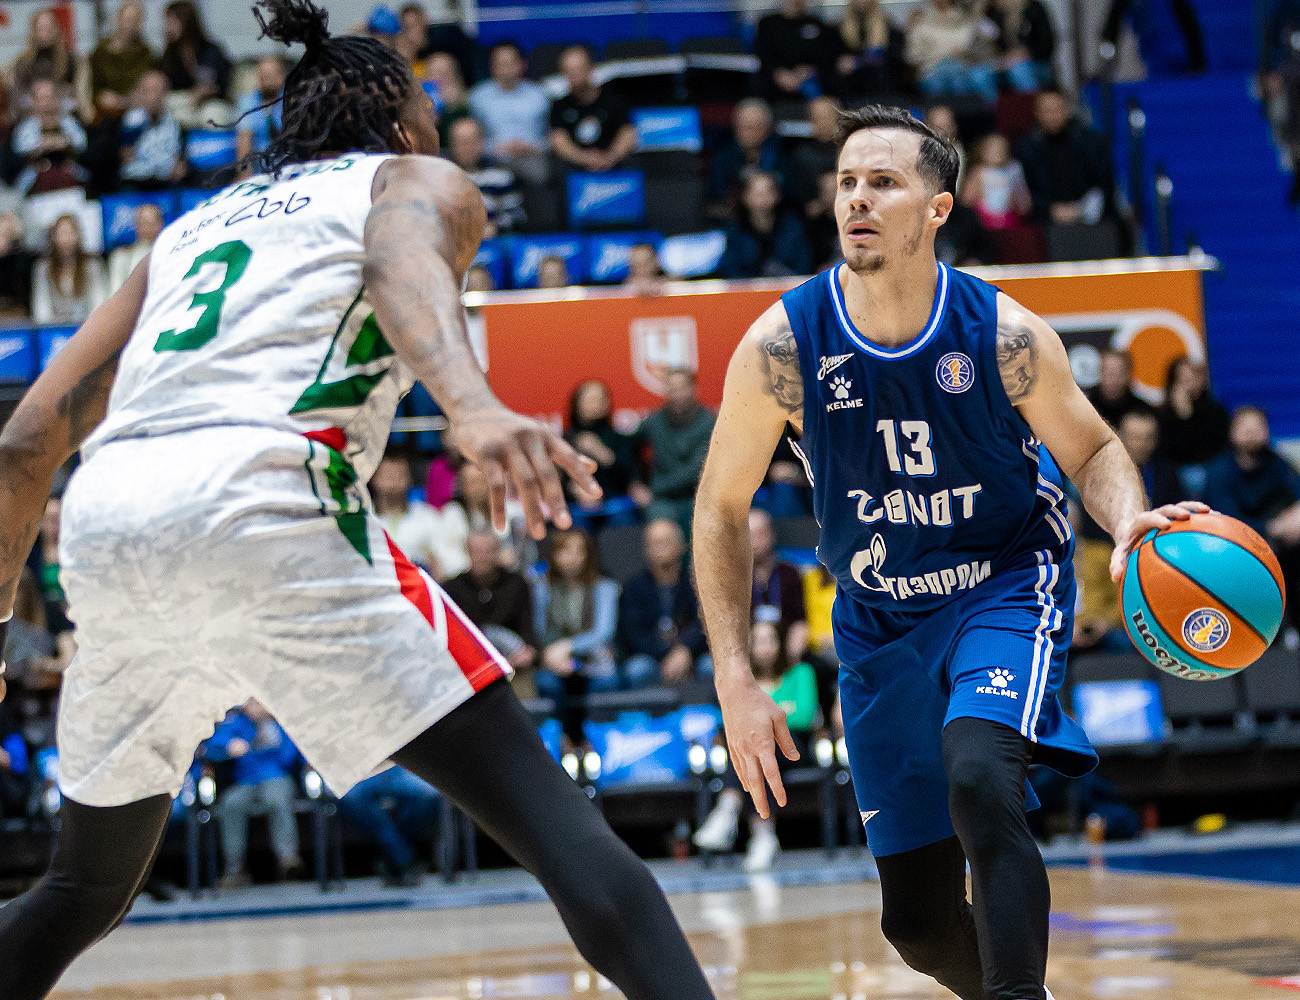 Zenit ends the regular season with the win over UNICS